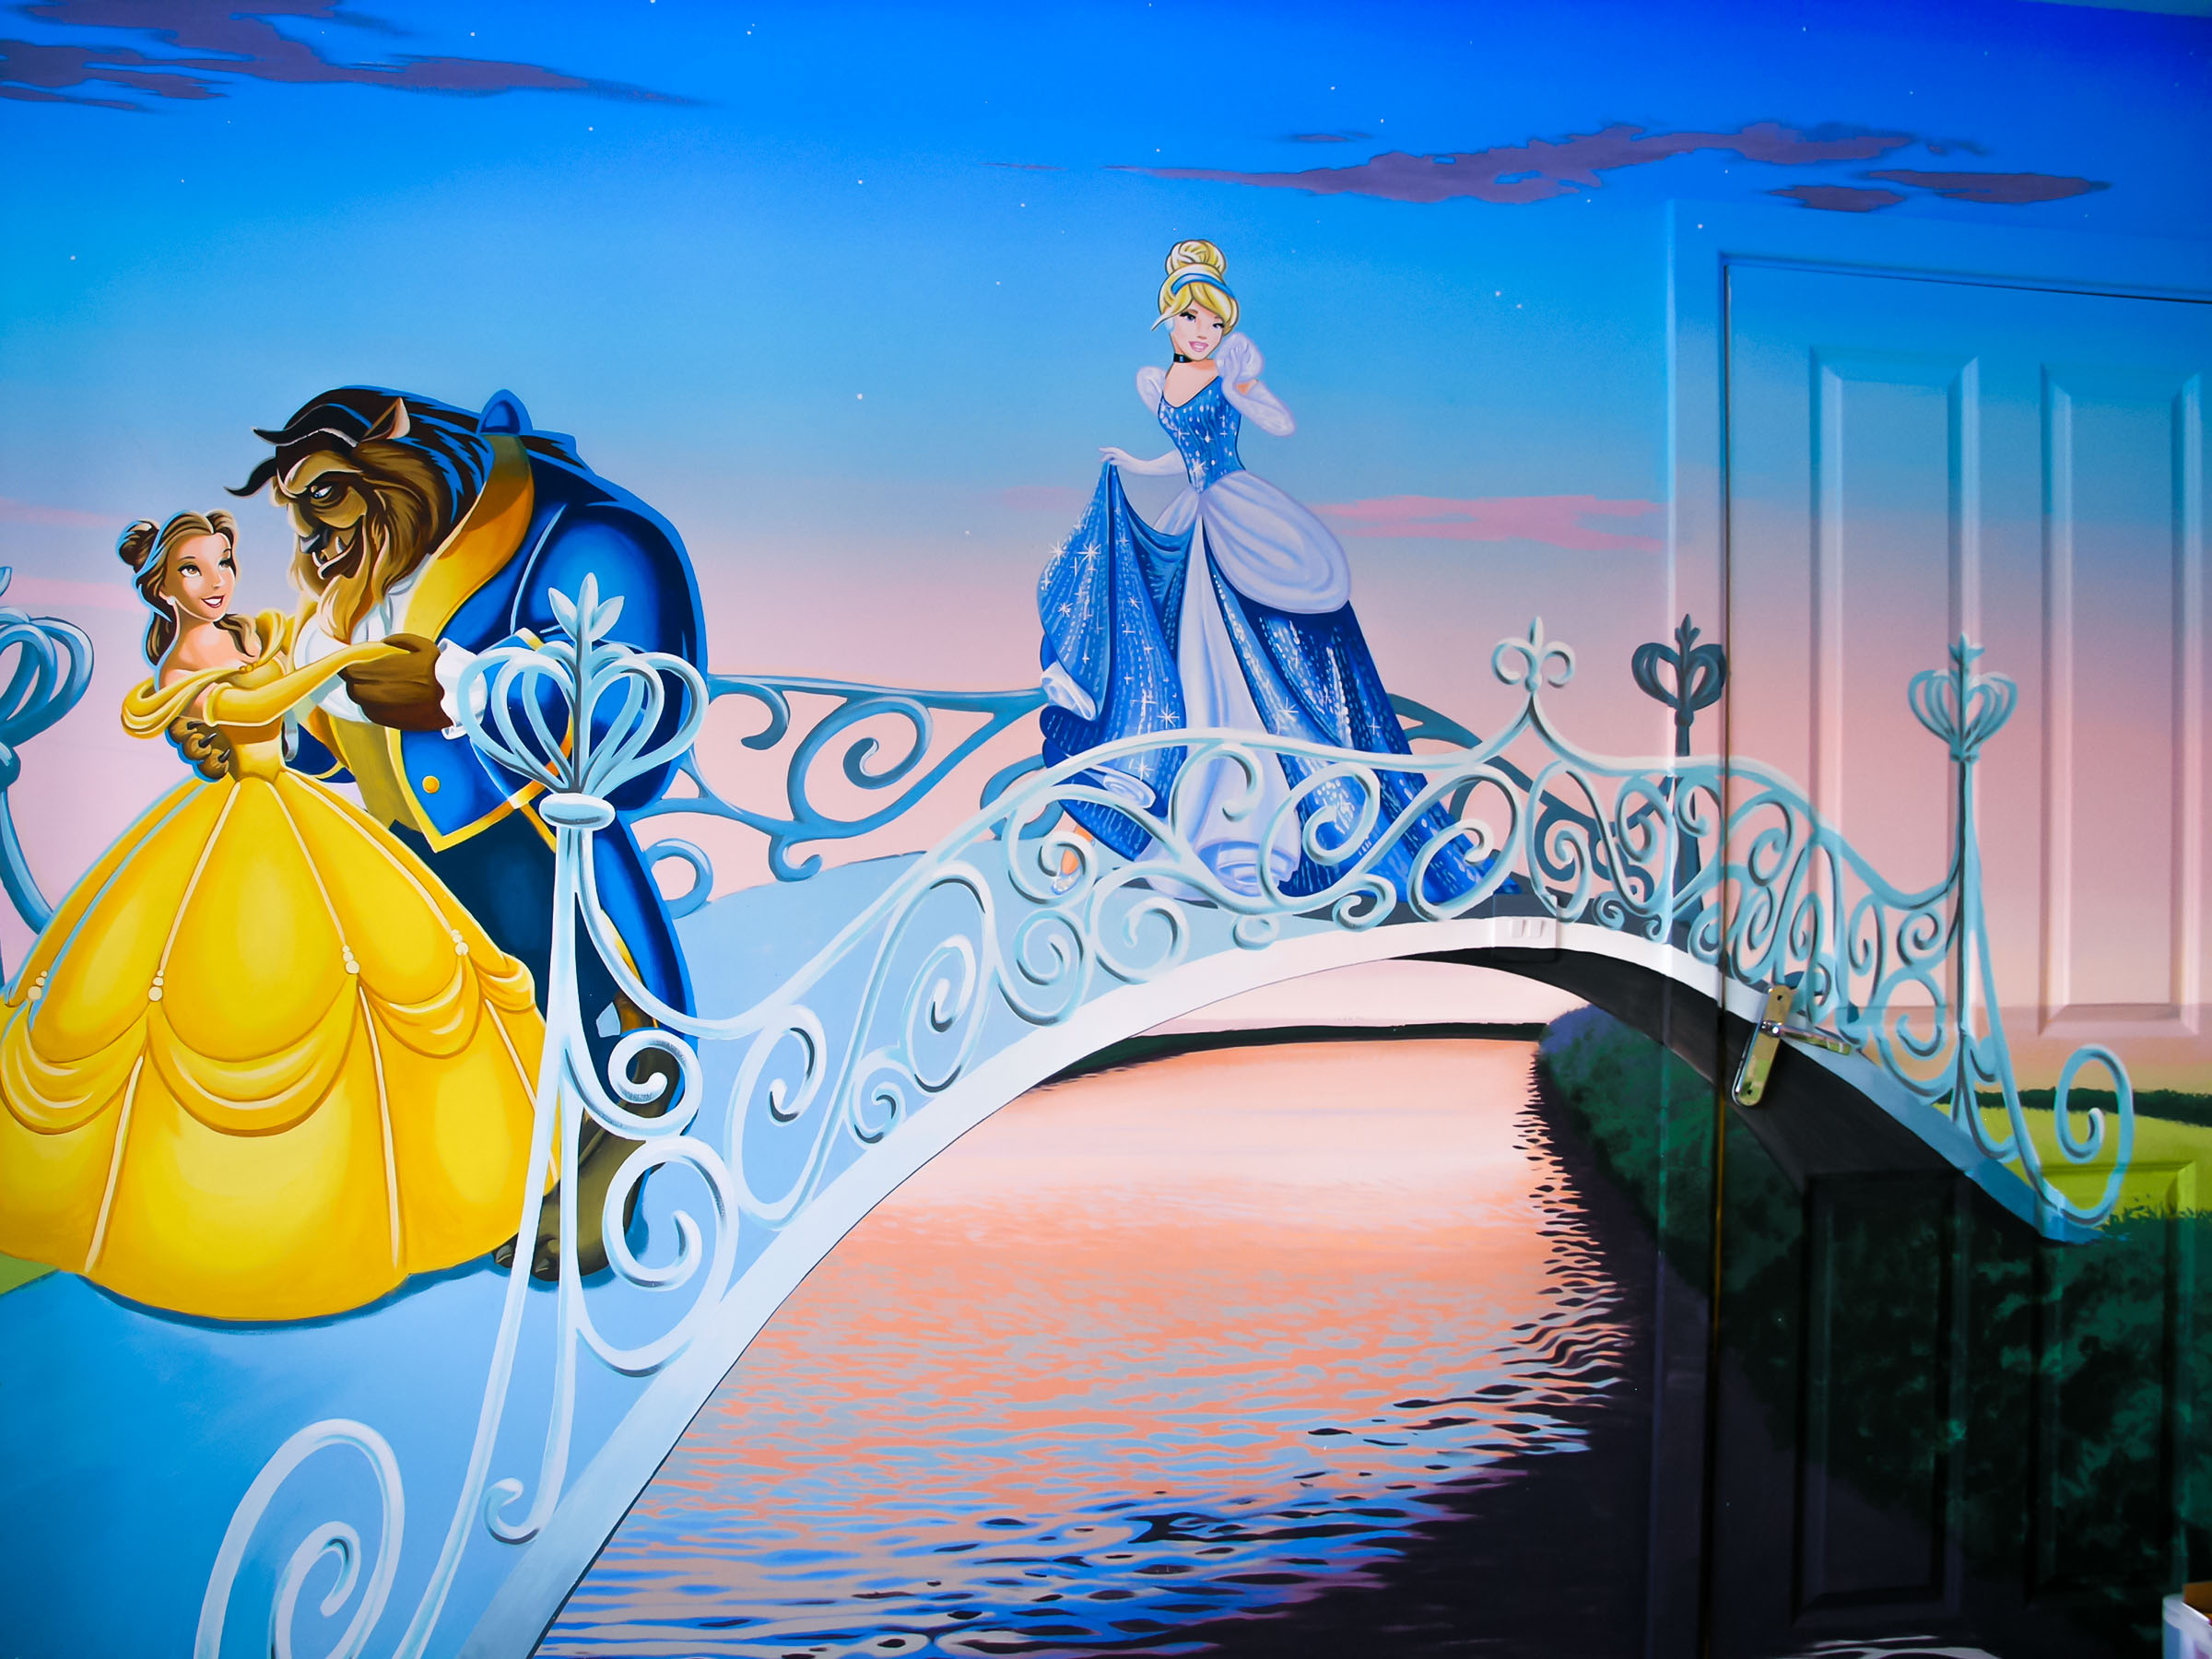 Cinderella and Beauty and the Beast on curly bridge